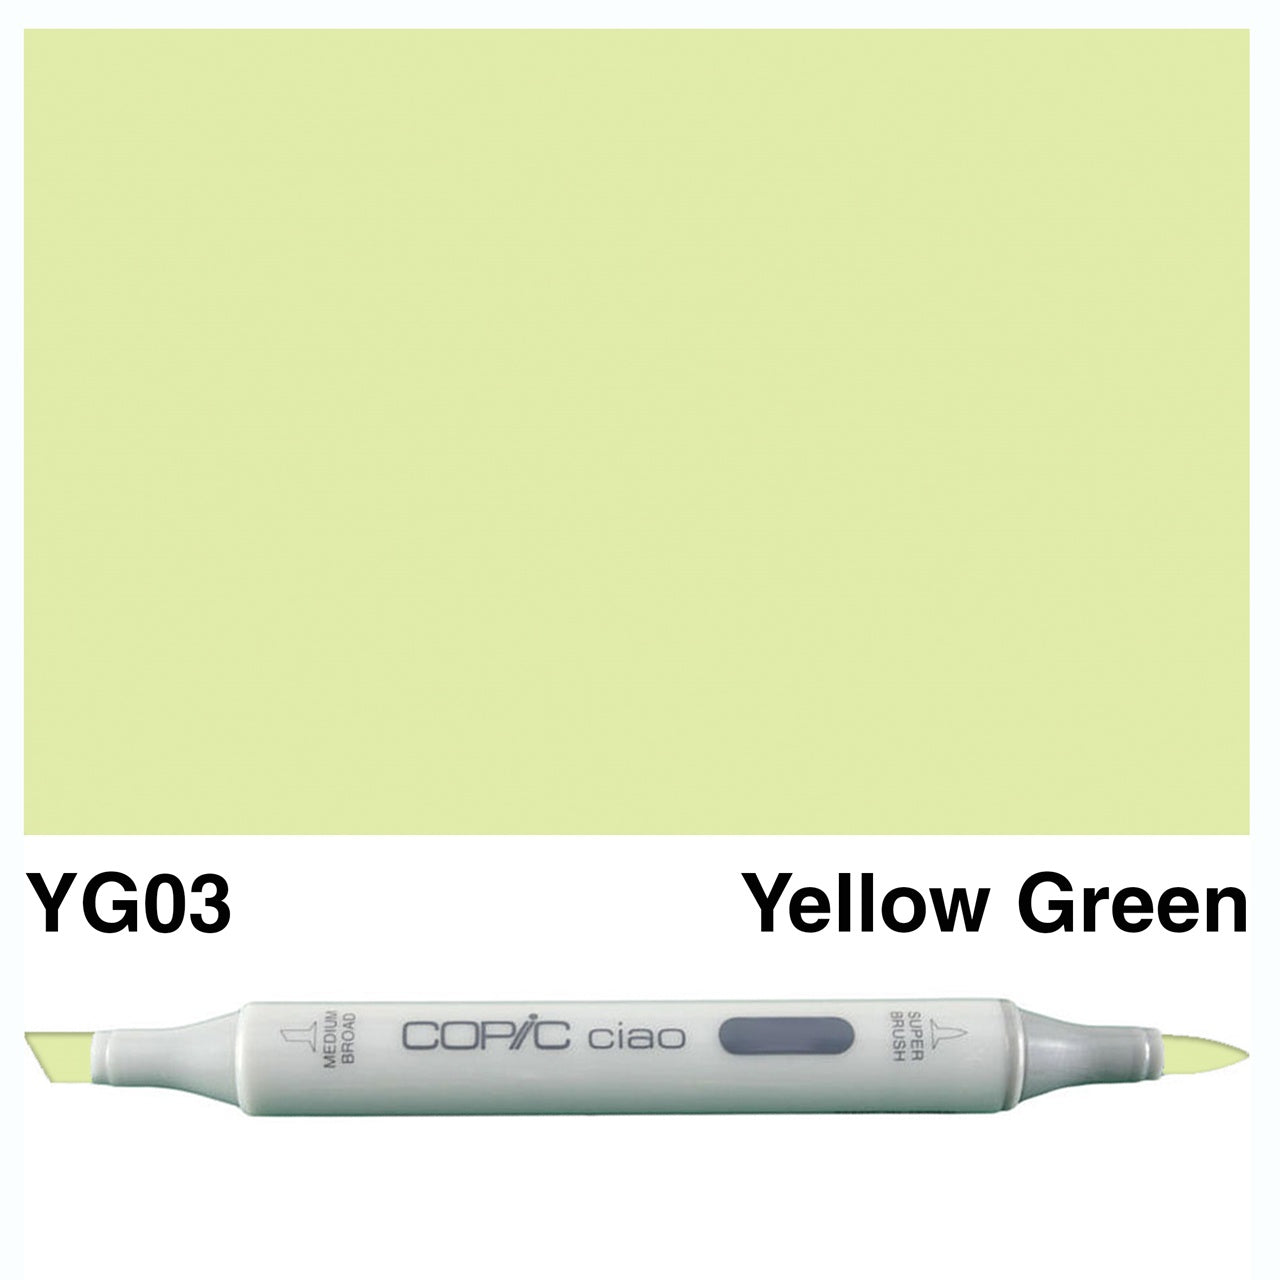 Copic Ciao Marker YG03 - Yellow Green